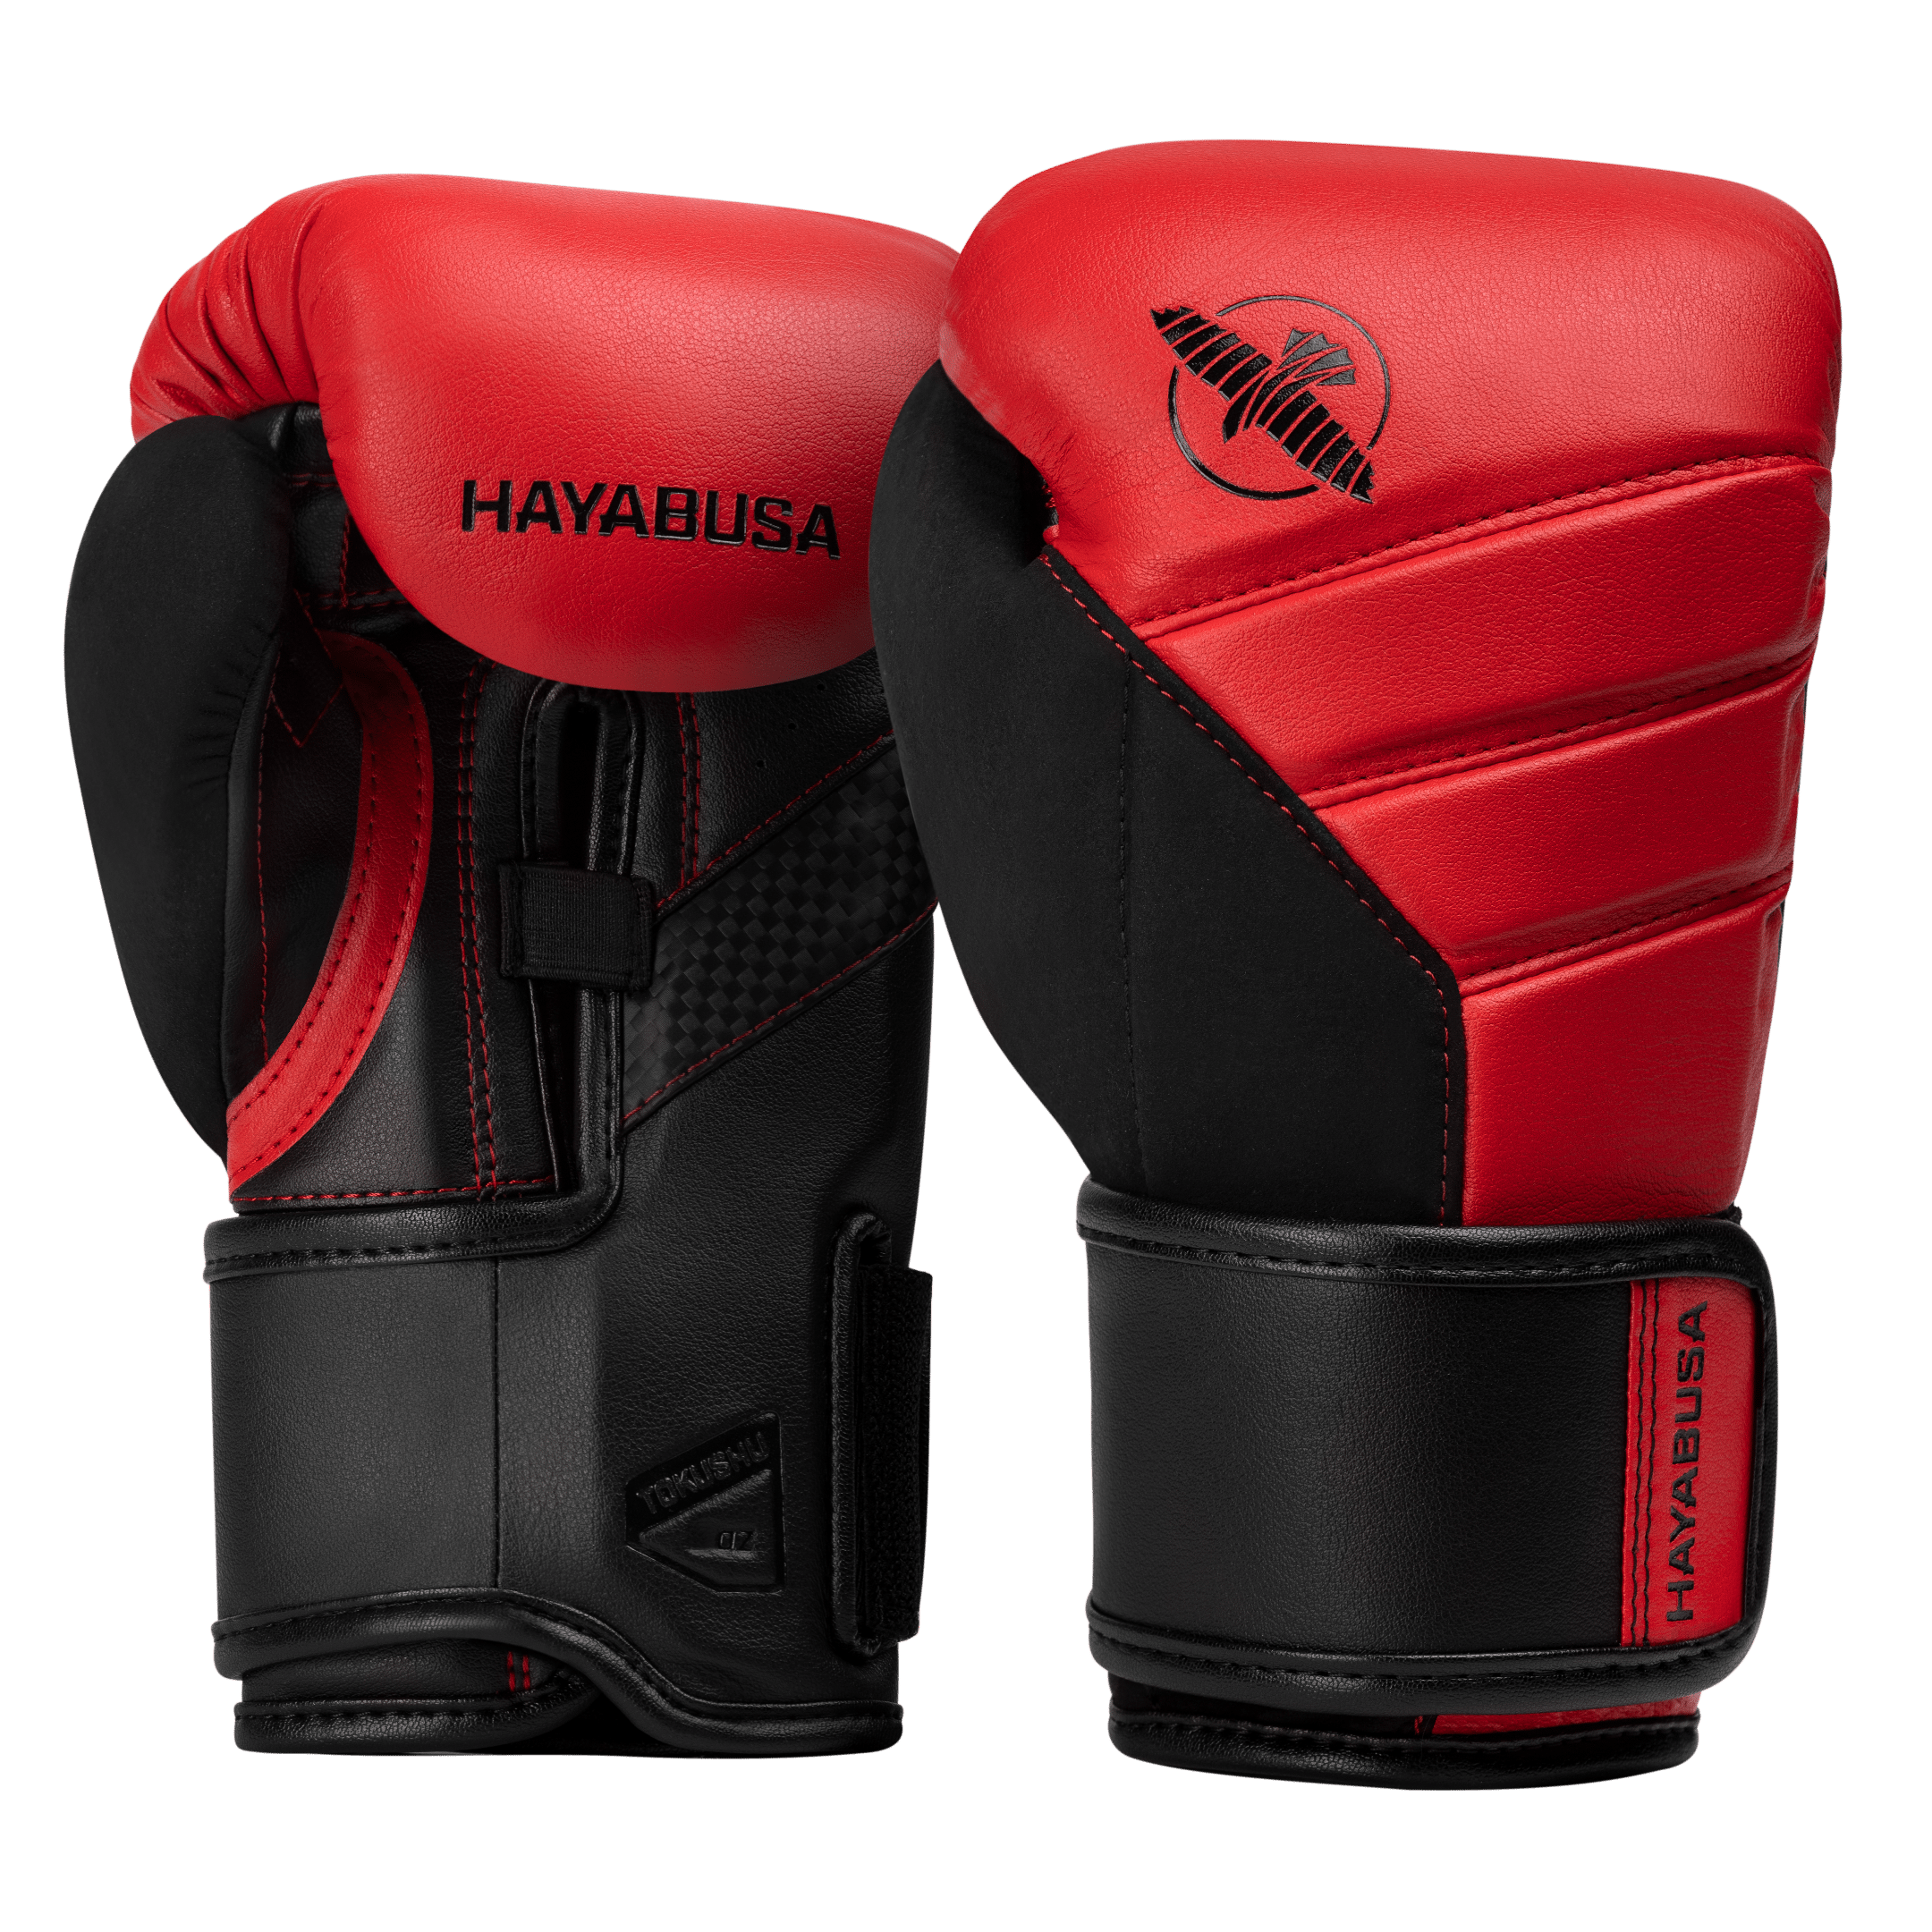 Hayabusa | Boxing Gloves - T3 Youth - XTC Fitness - Exercise Equipment Superstore - Canada - Boxing Gloves